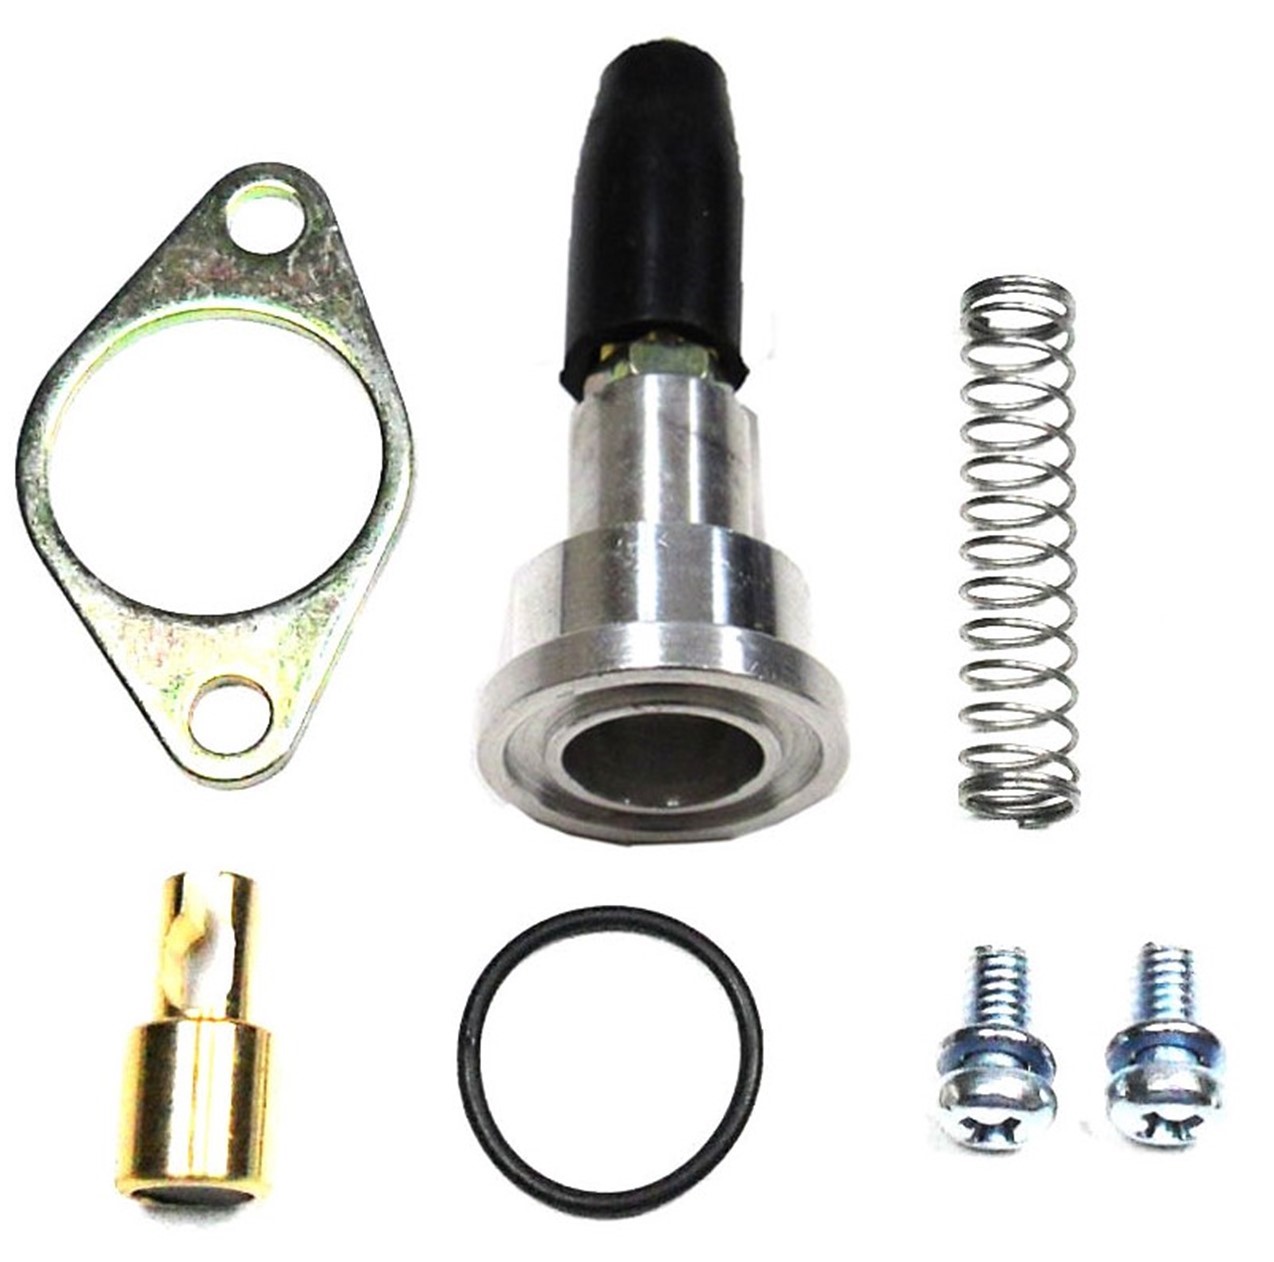 Sunworld H68 / Mikuni Style 18mm 2 Stroke Carburetor Manual Choke Assembly For most 50-90cc ATVs, Scooters - Click Image to Close